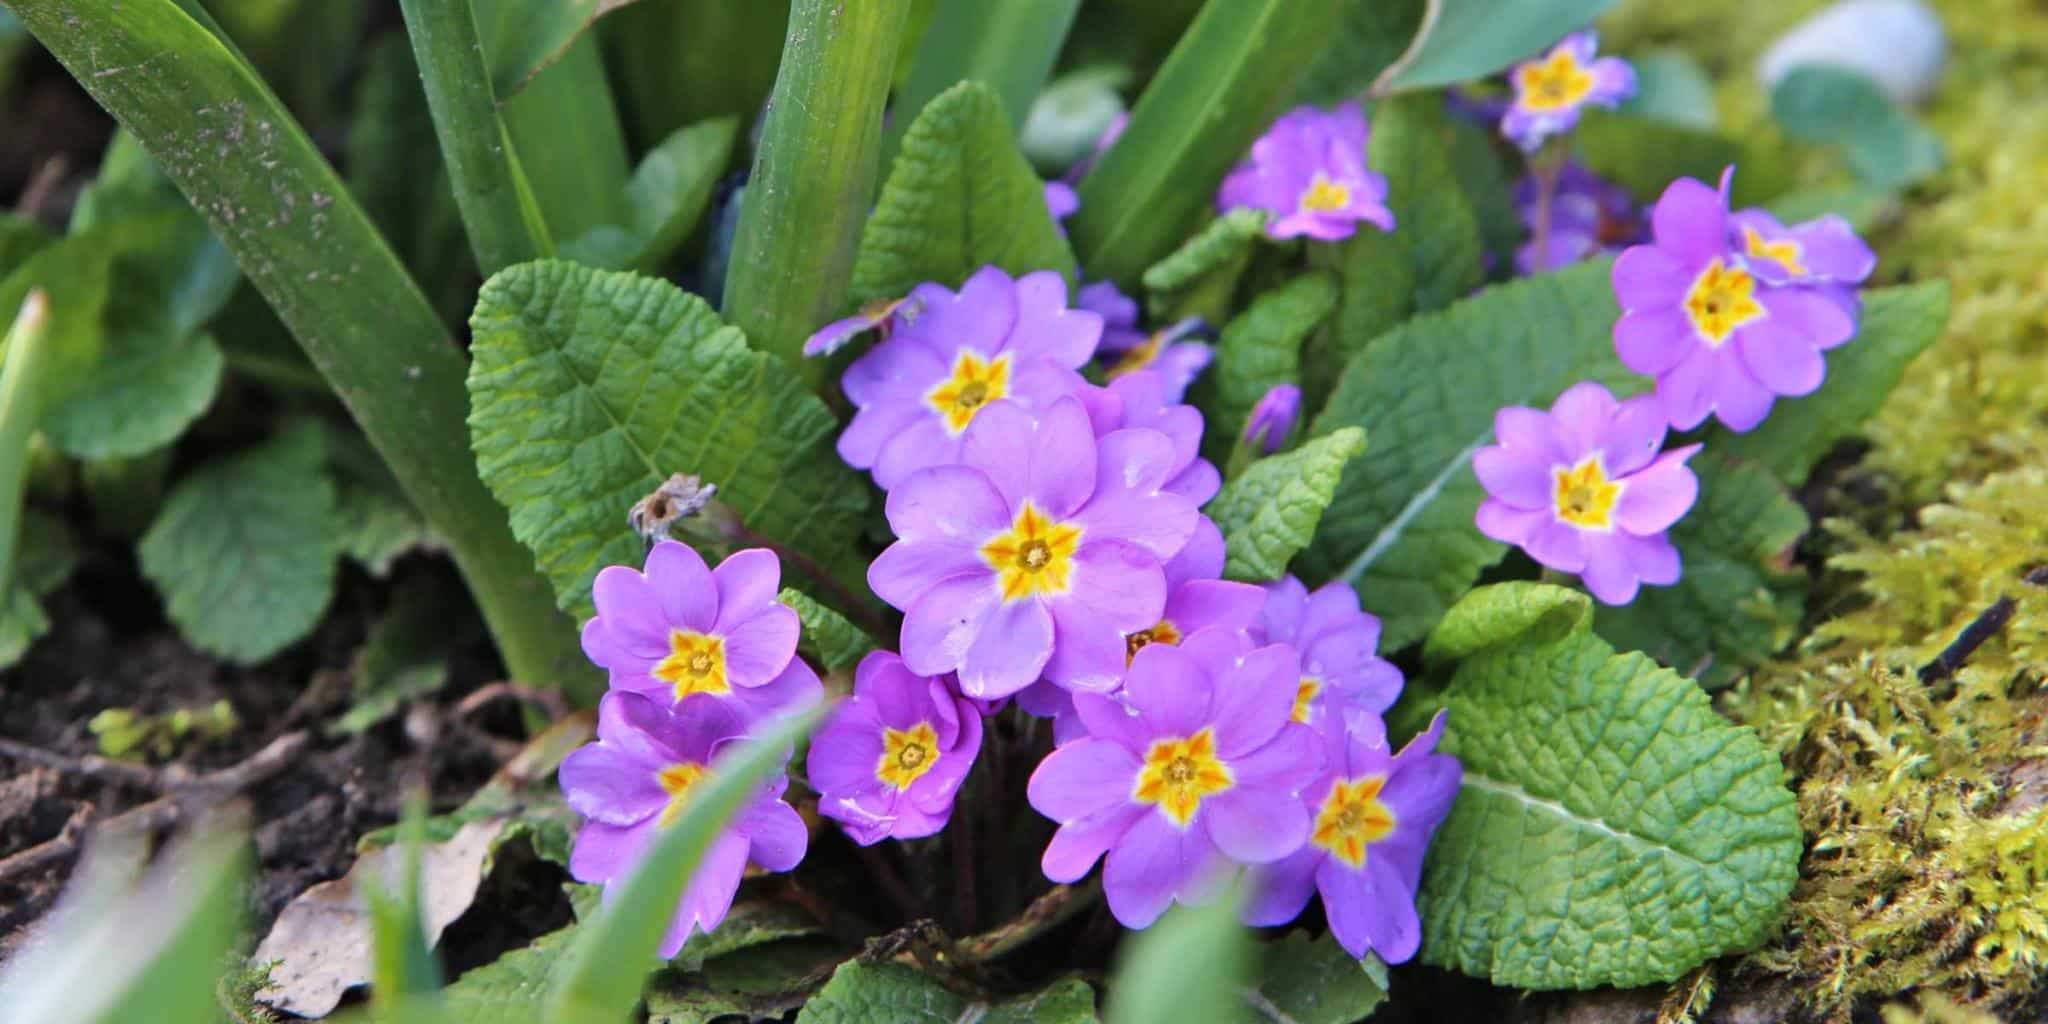 Primrose Planting And Advice On Caring For This Winter Blooming Wonder